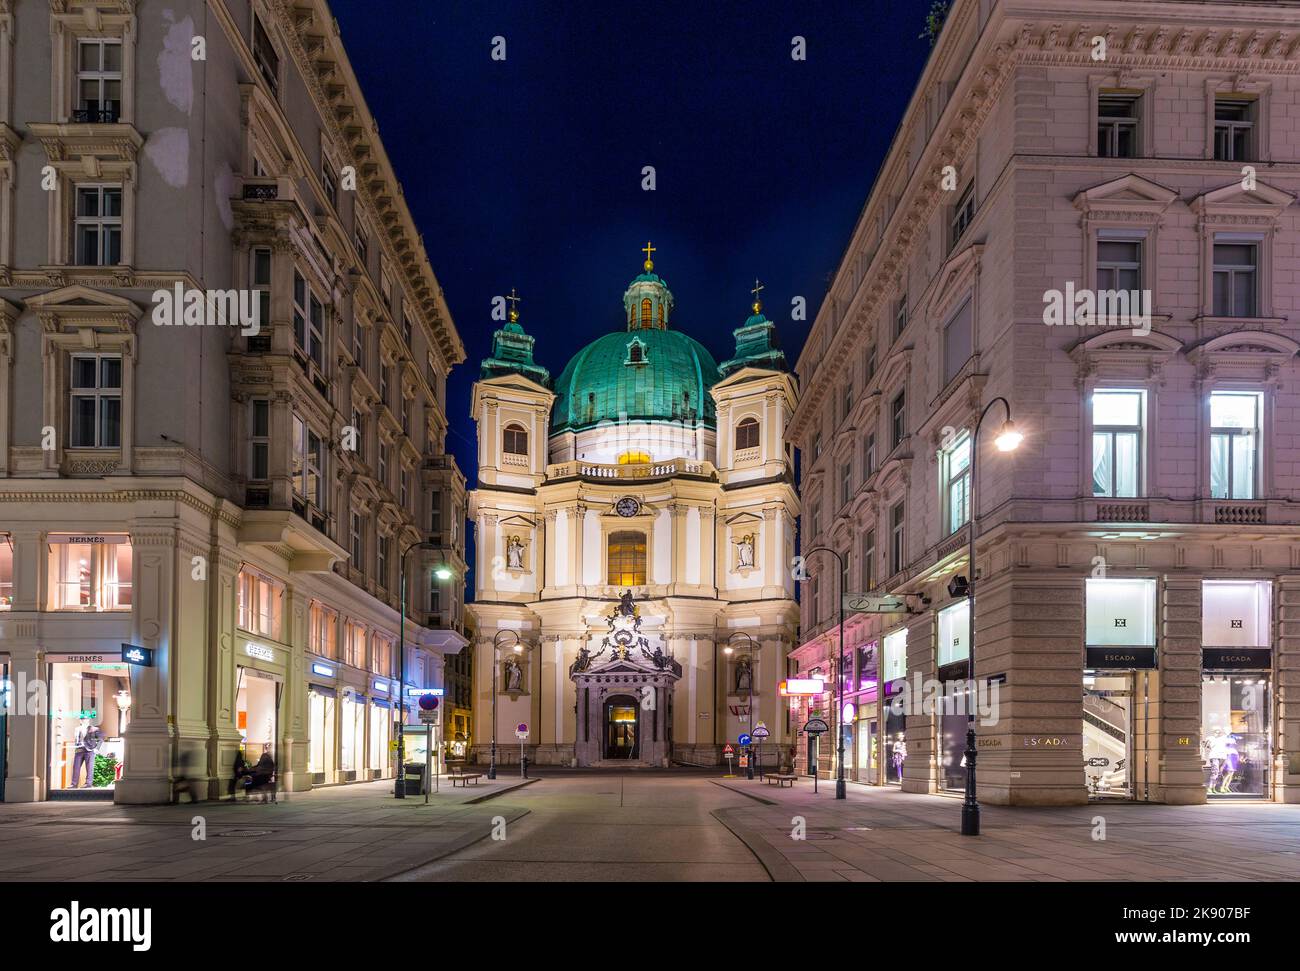 VIENNA, AUSTRIA - APR 26, 2015: Catholic Church of St. Peterat Graben street in in Vienna. Graben street is among most recognized streets in Vienna wh Stock Photo